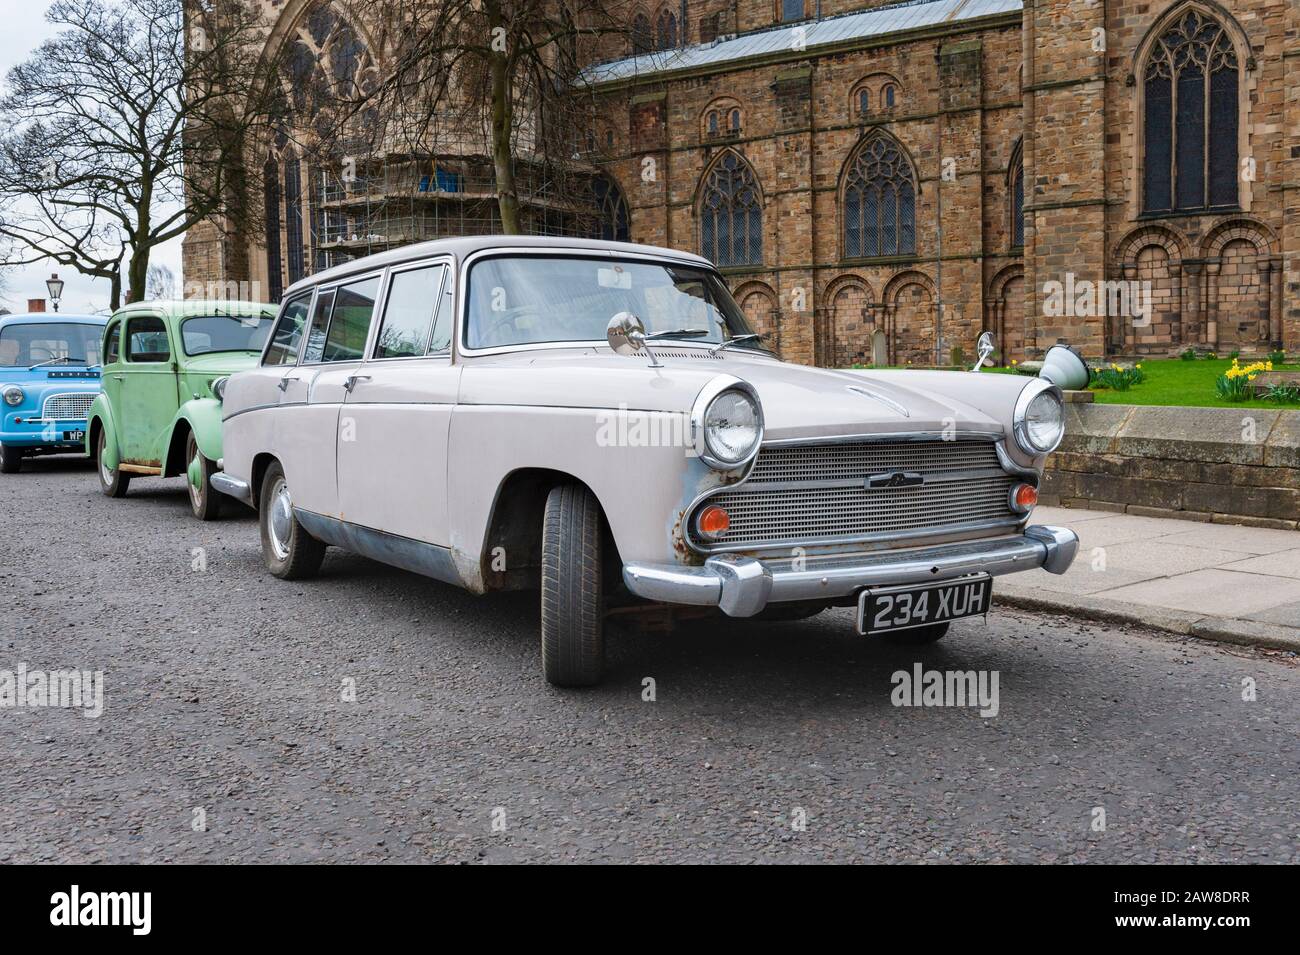 Classic car from1960's British Motor Industry - Austin Cambridge A60 station wagon car Foto Stock